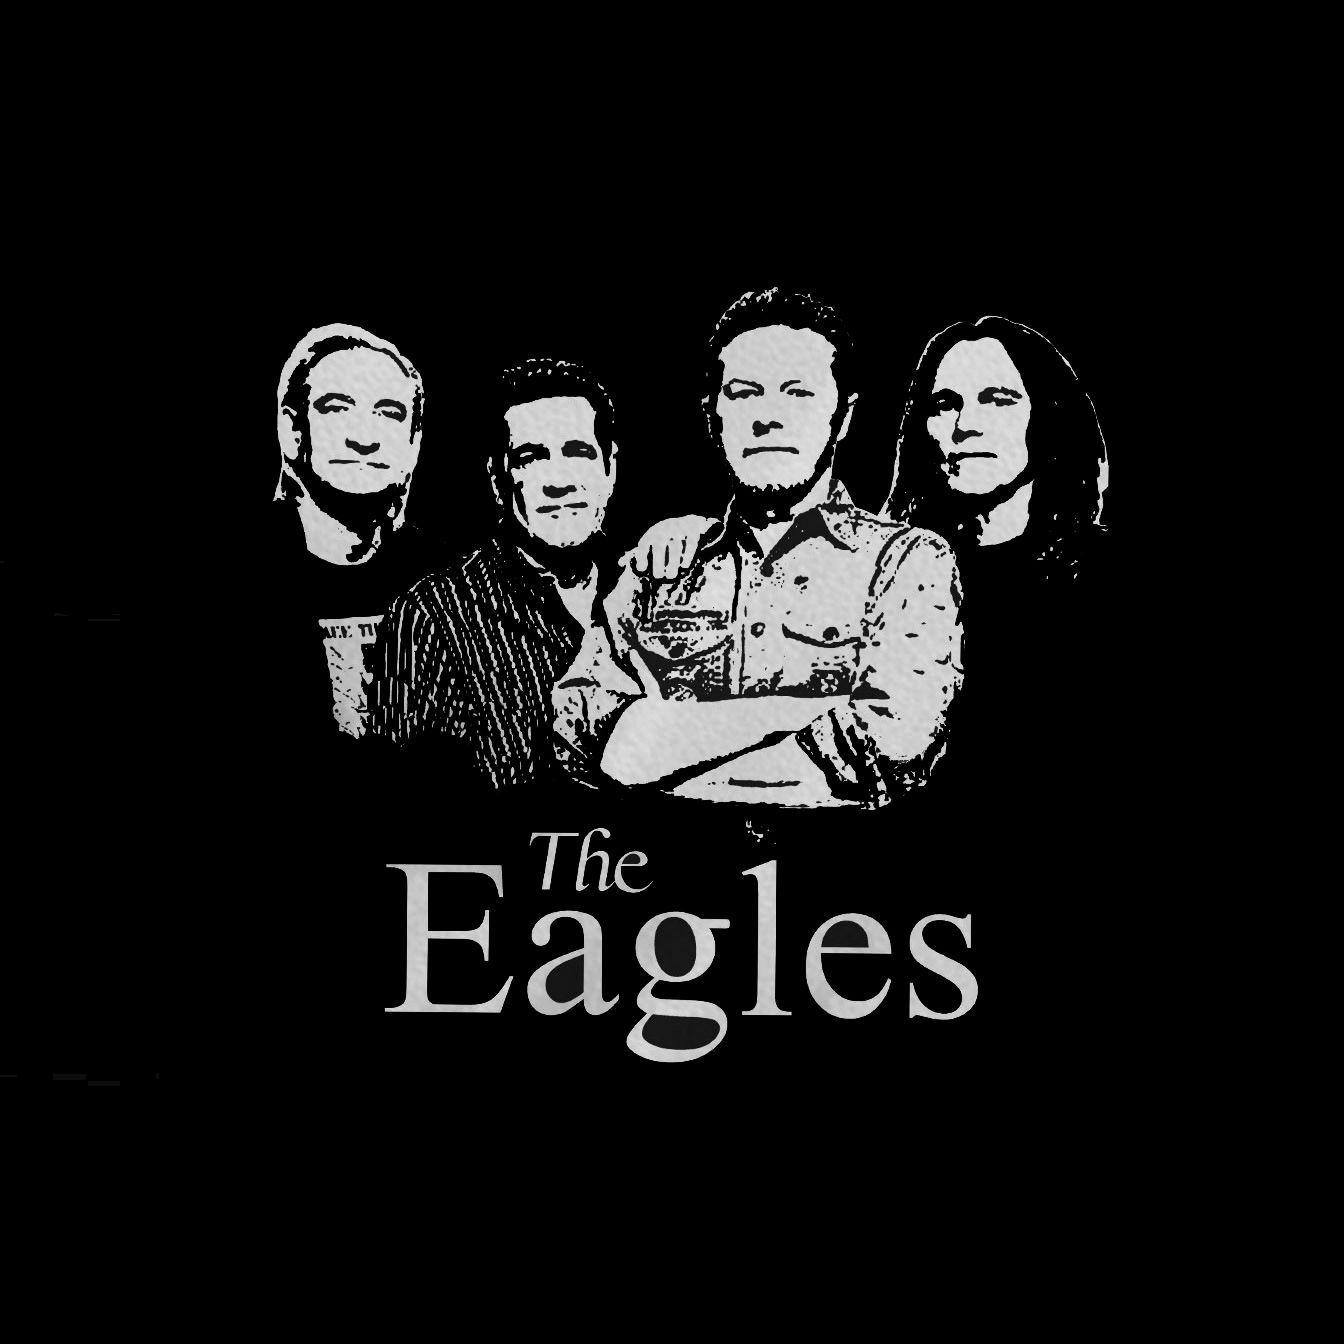 Which Song by The Eagles Are You?